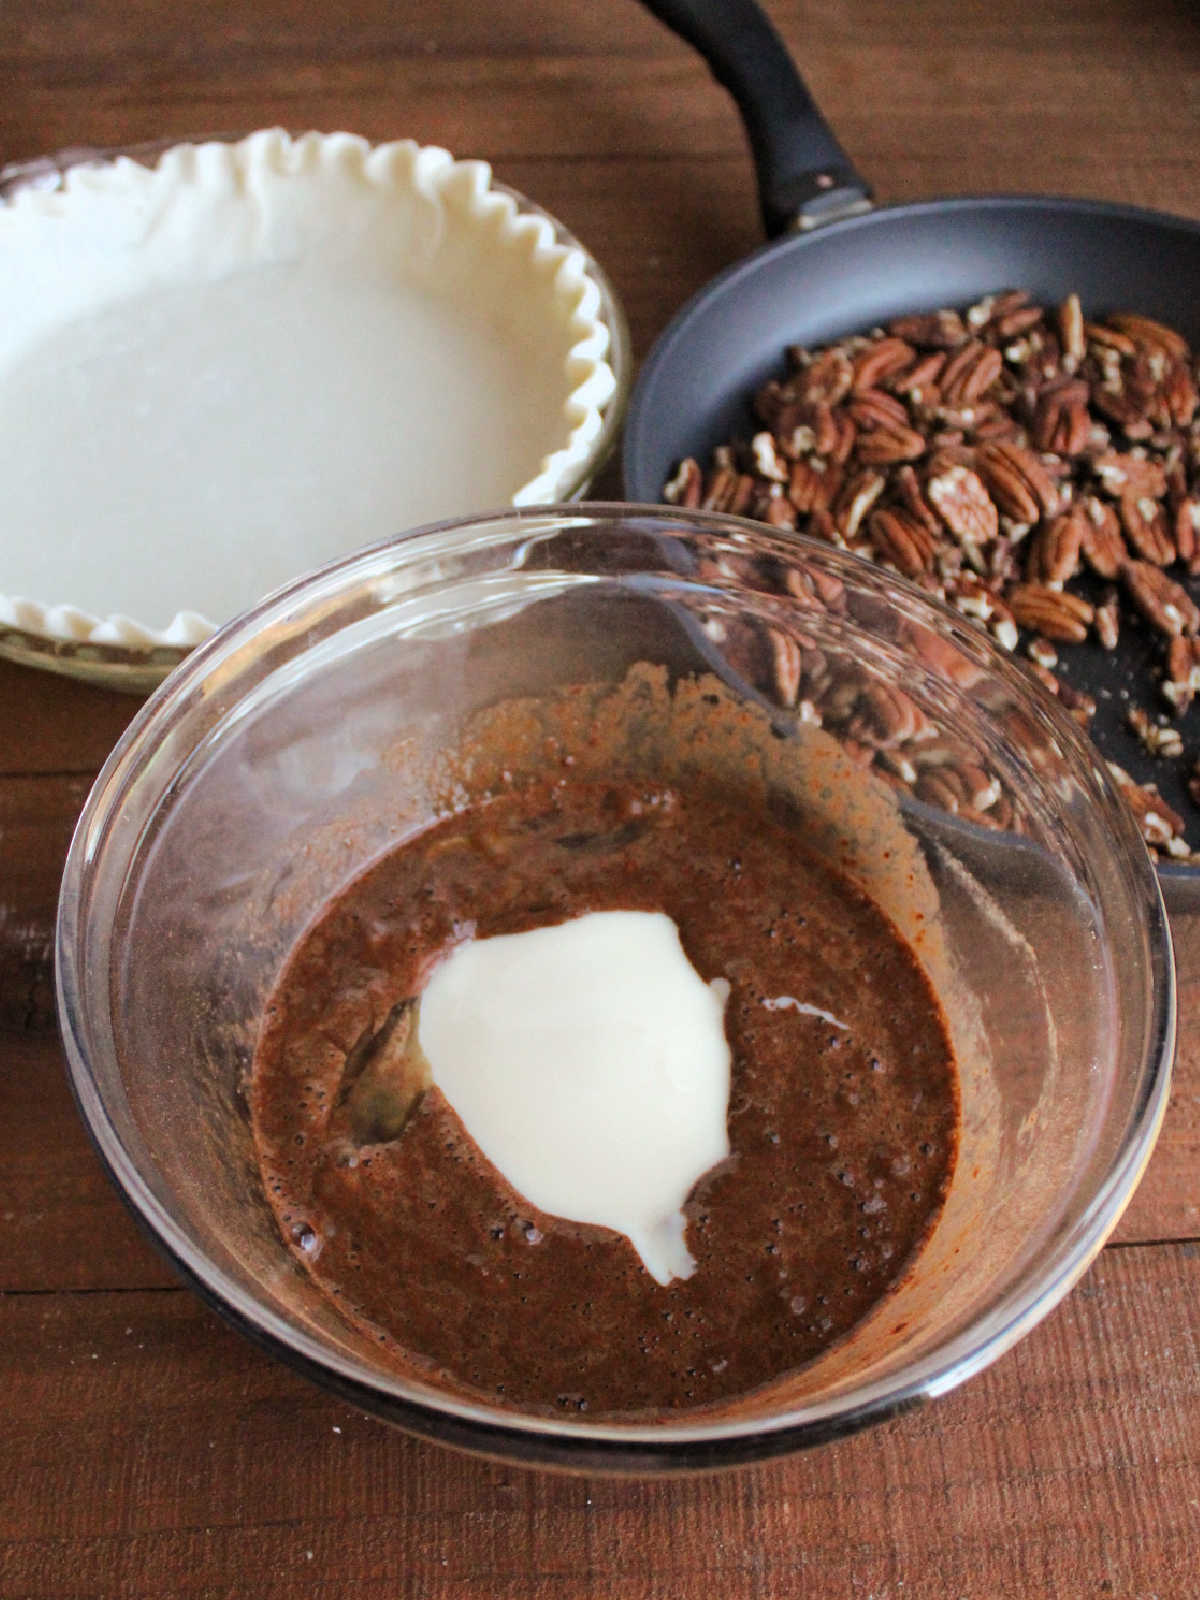 Large mixing bowl with condensed milk poured into chocolate egg mixture, ready to be made into pecanpie filling.